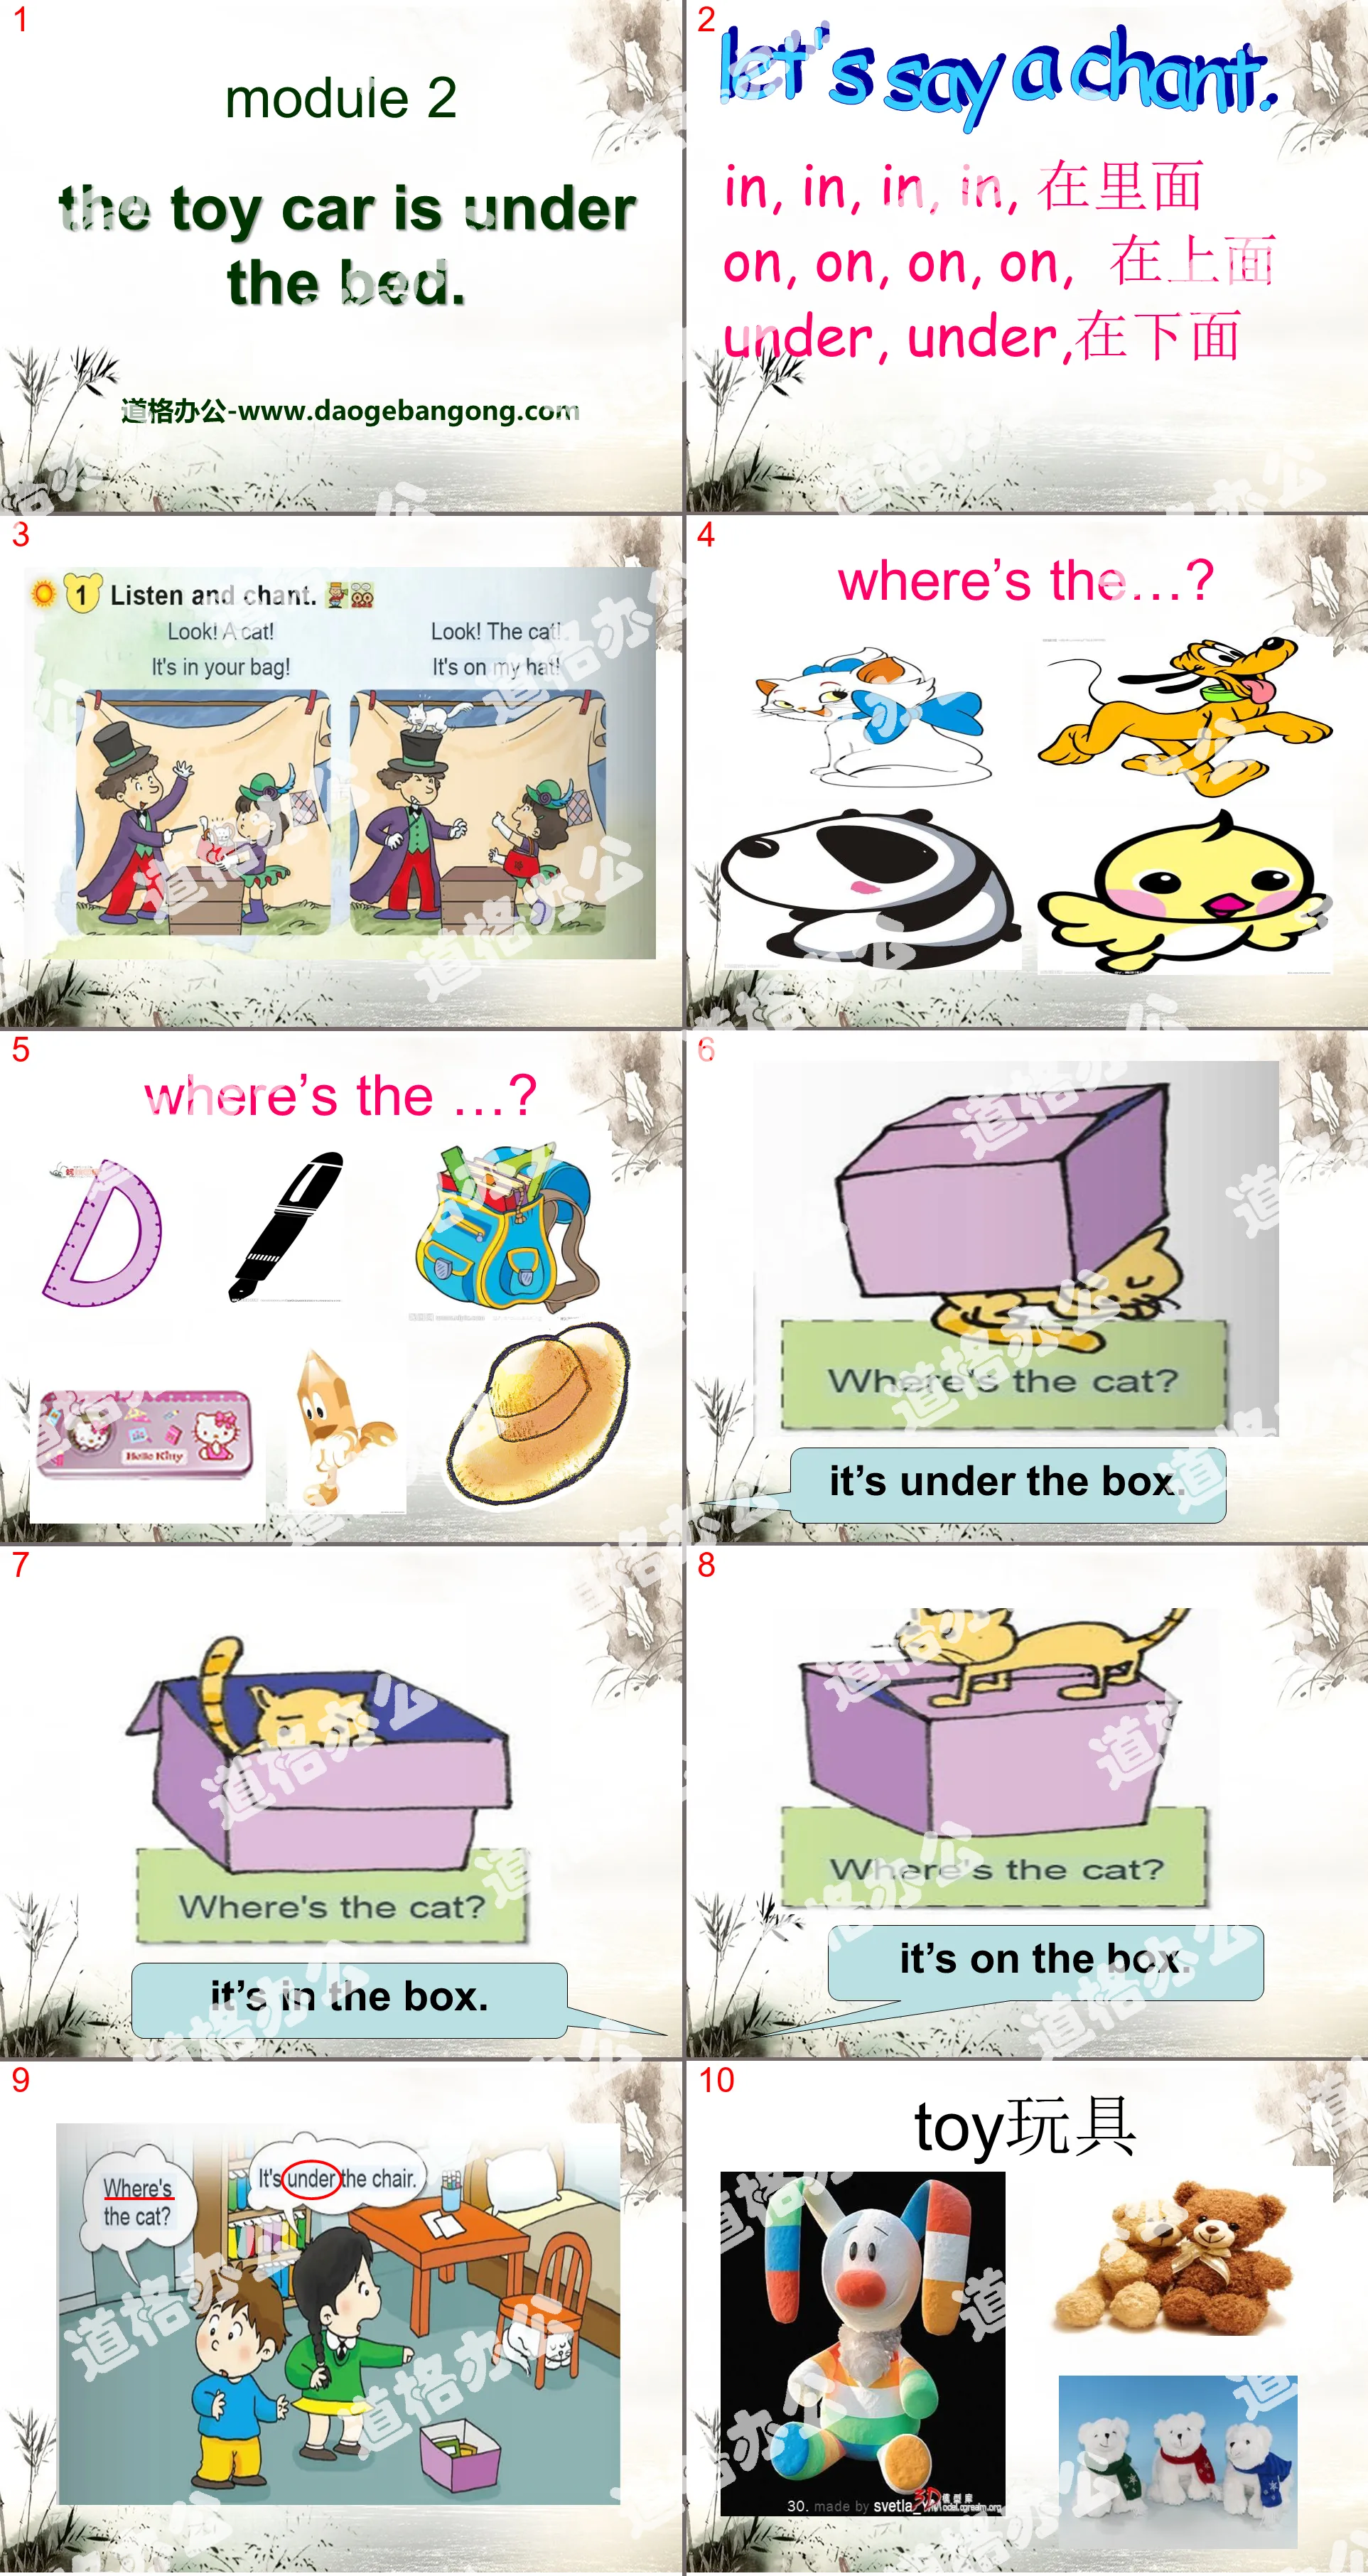 "The toy car is under the bed" PPT courseware 3